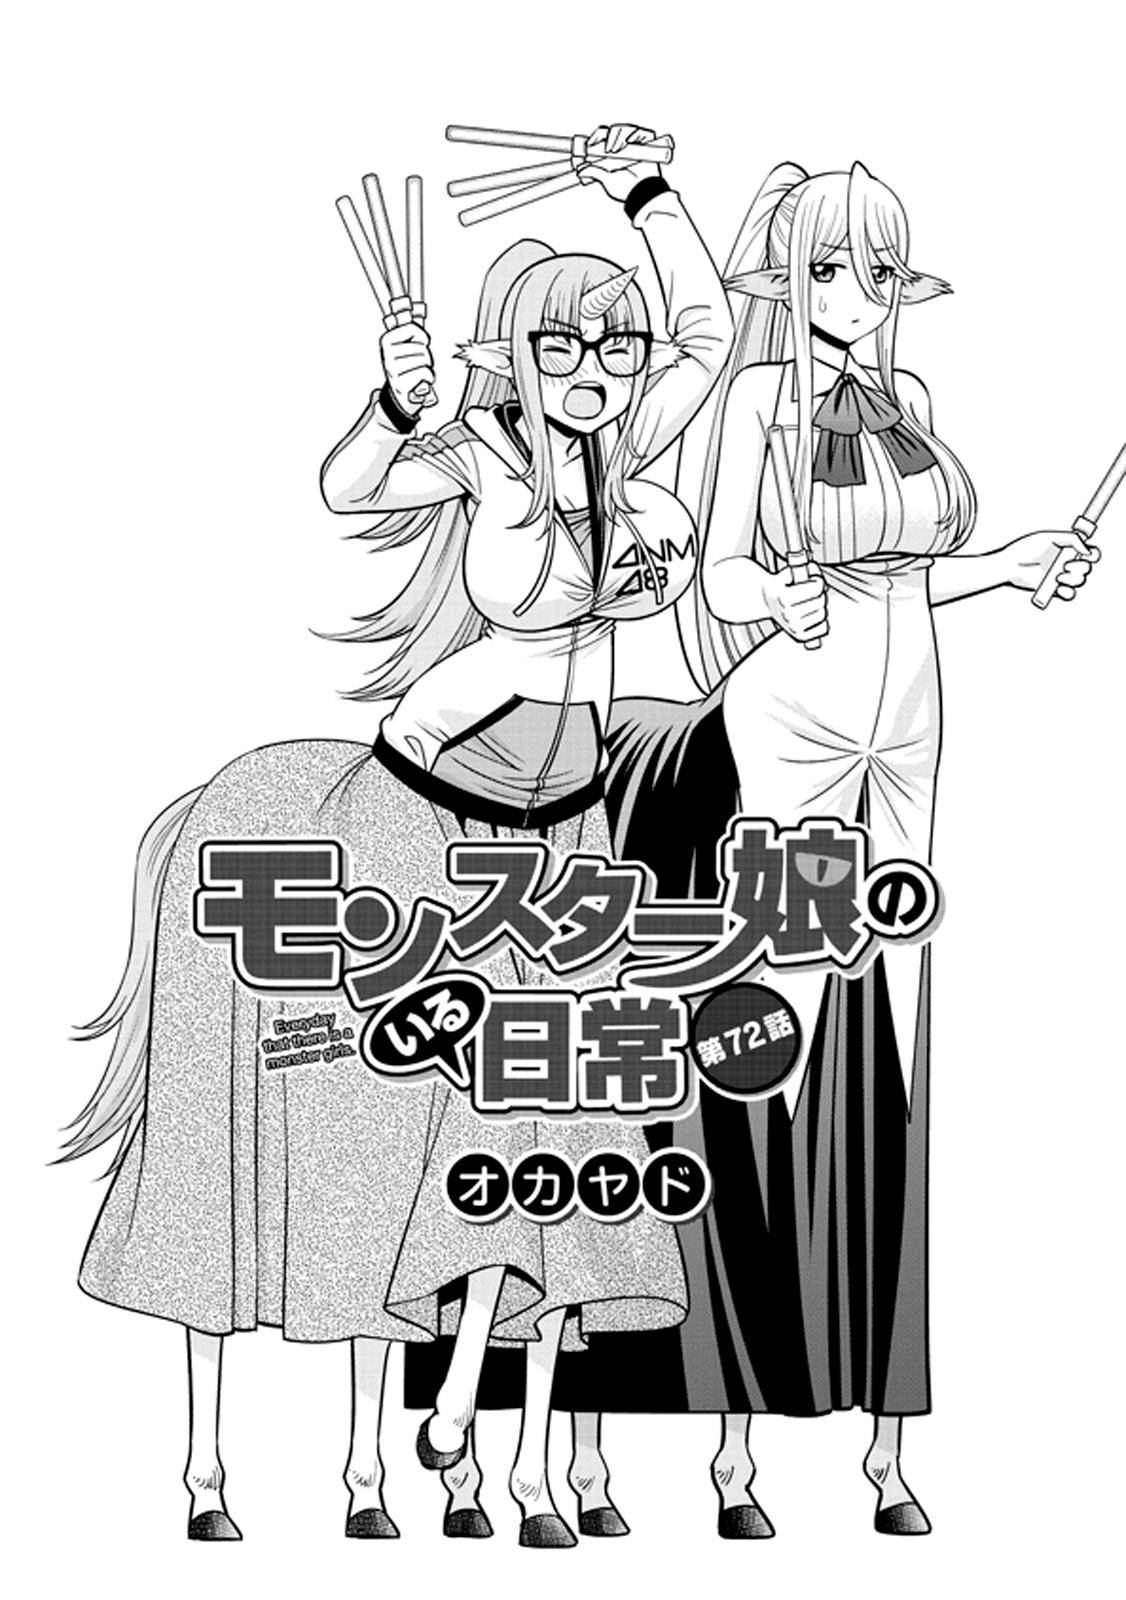 Monster musume chapter